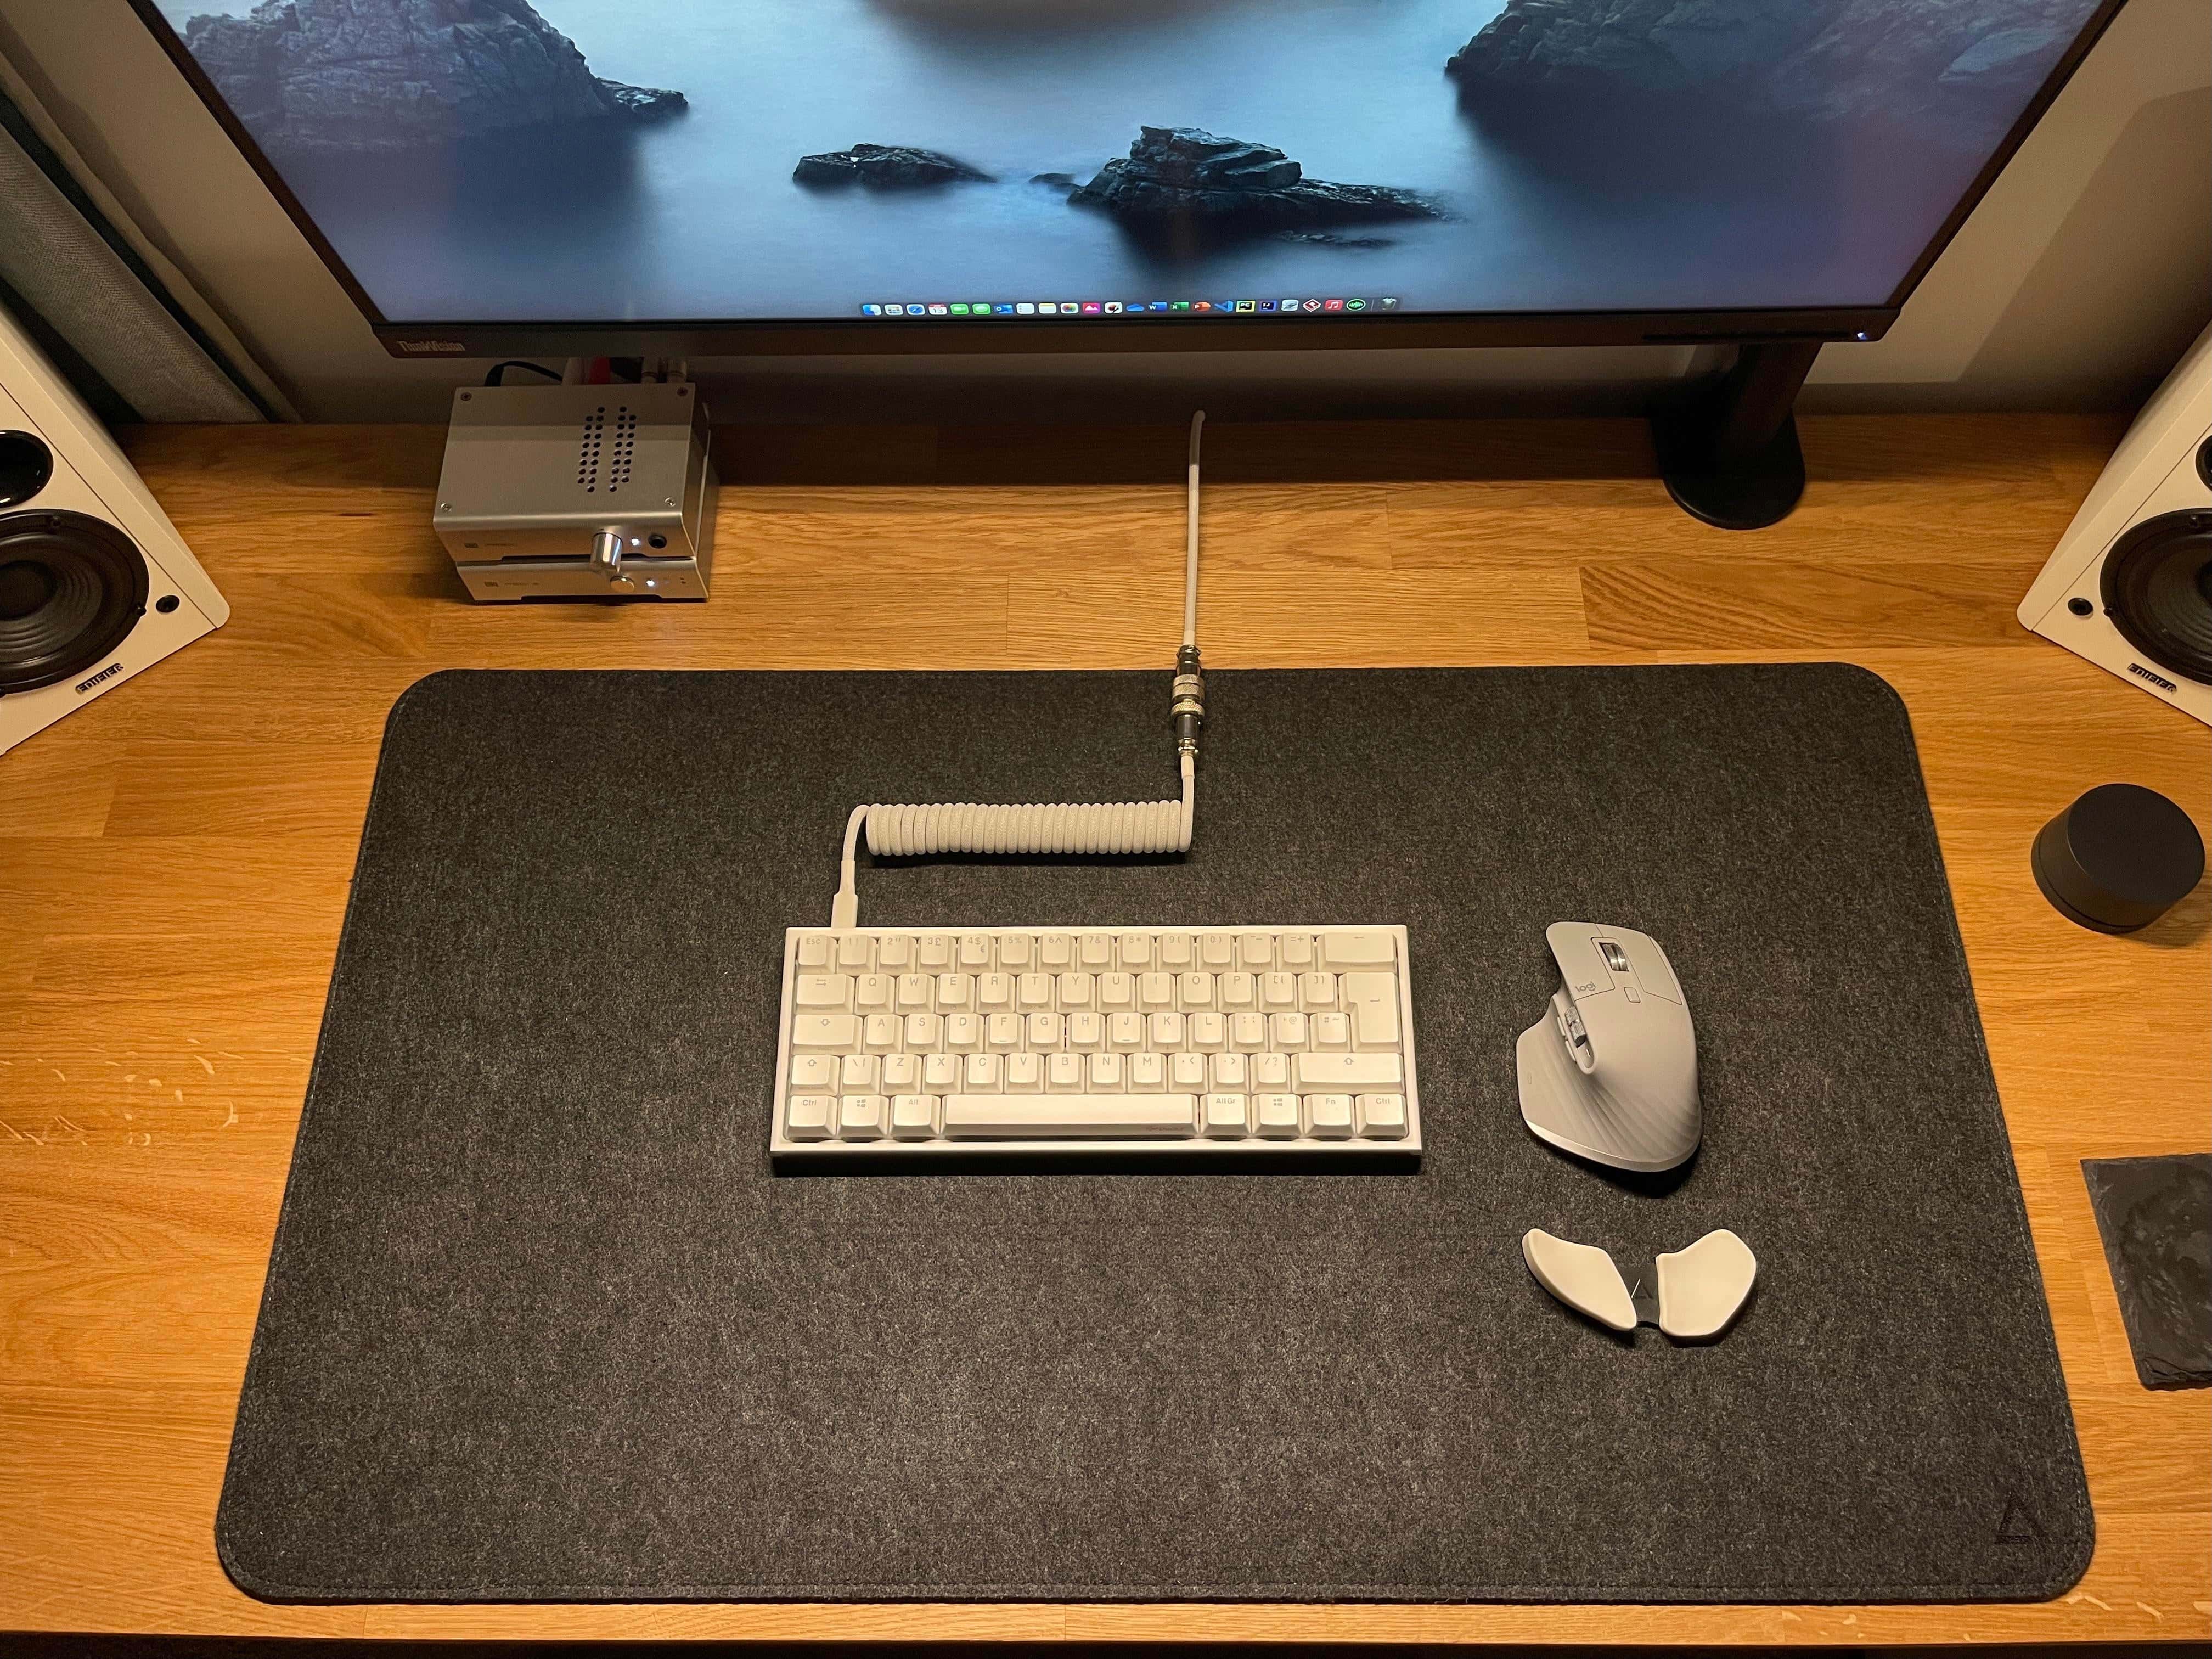 You don't see that ergonomic wrist rest for the mouse and that coiled cable for the keyboard every day. 